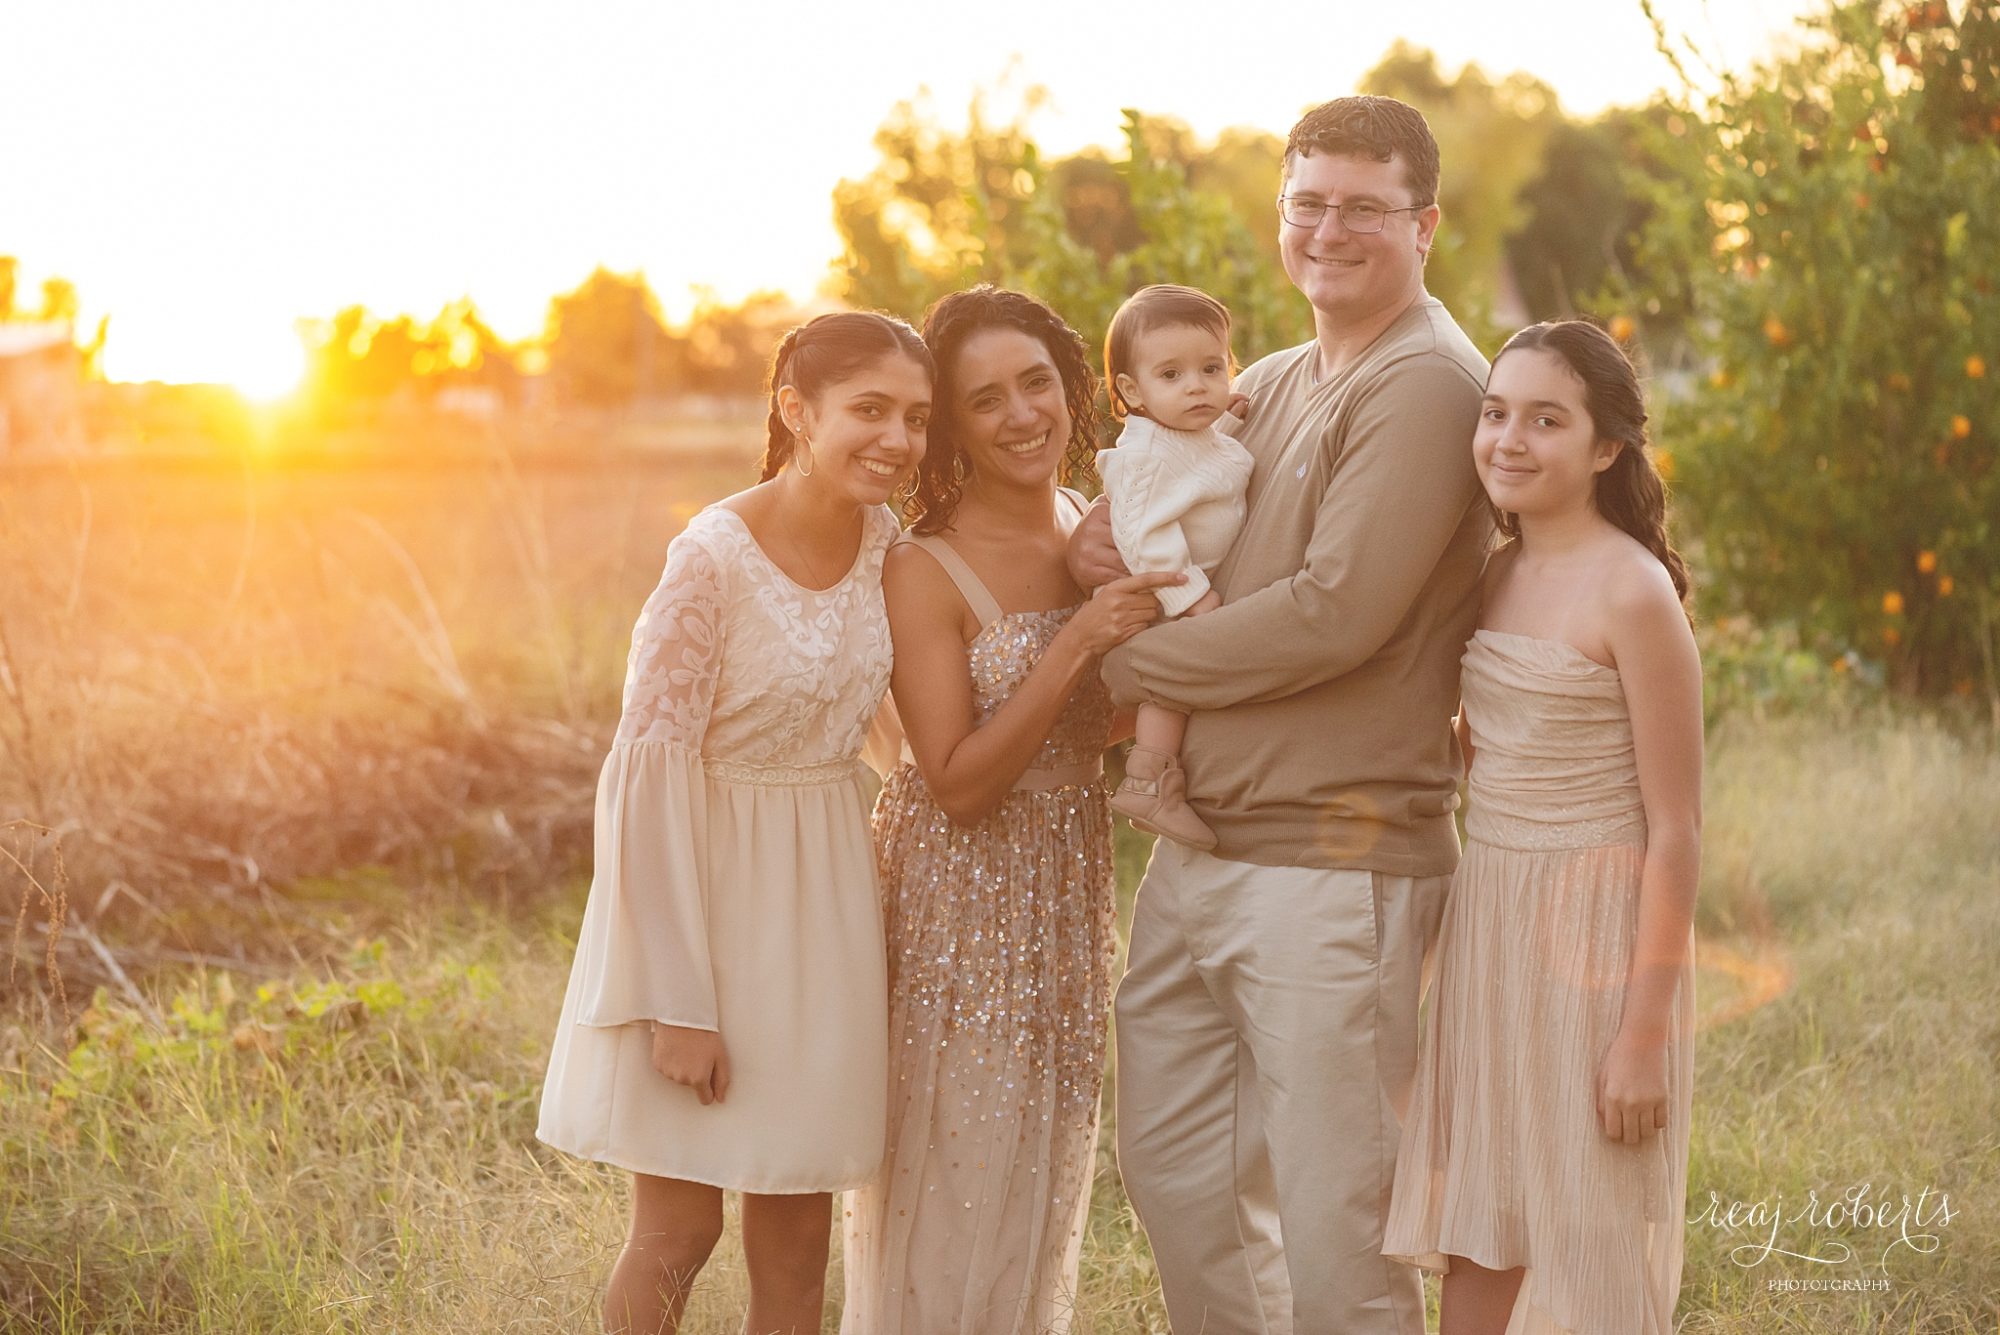 Family Photographer in Phoenix | Chandler Family Photos in Orange Grove Field | Neutral Clothing